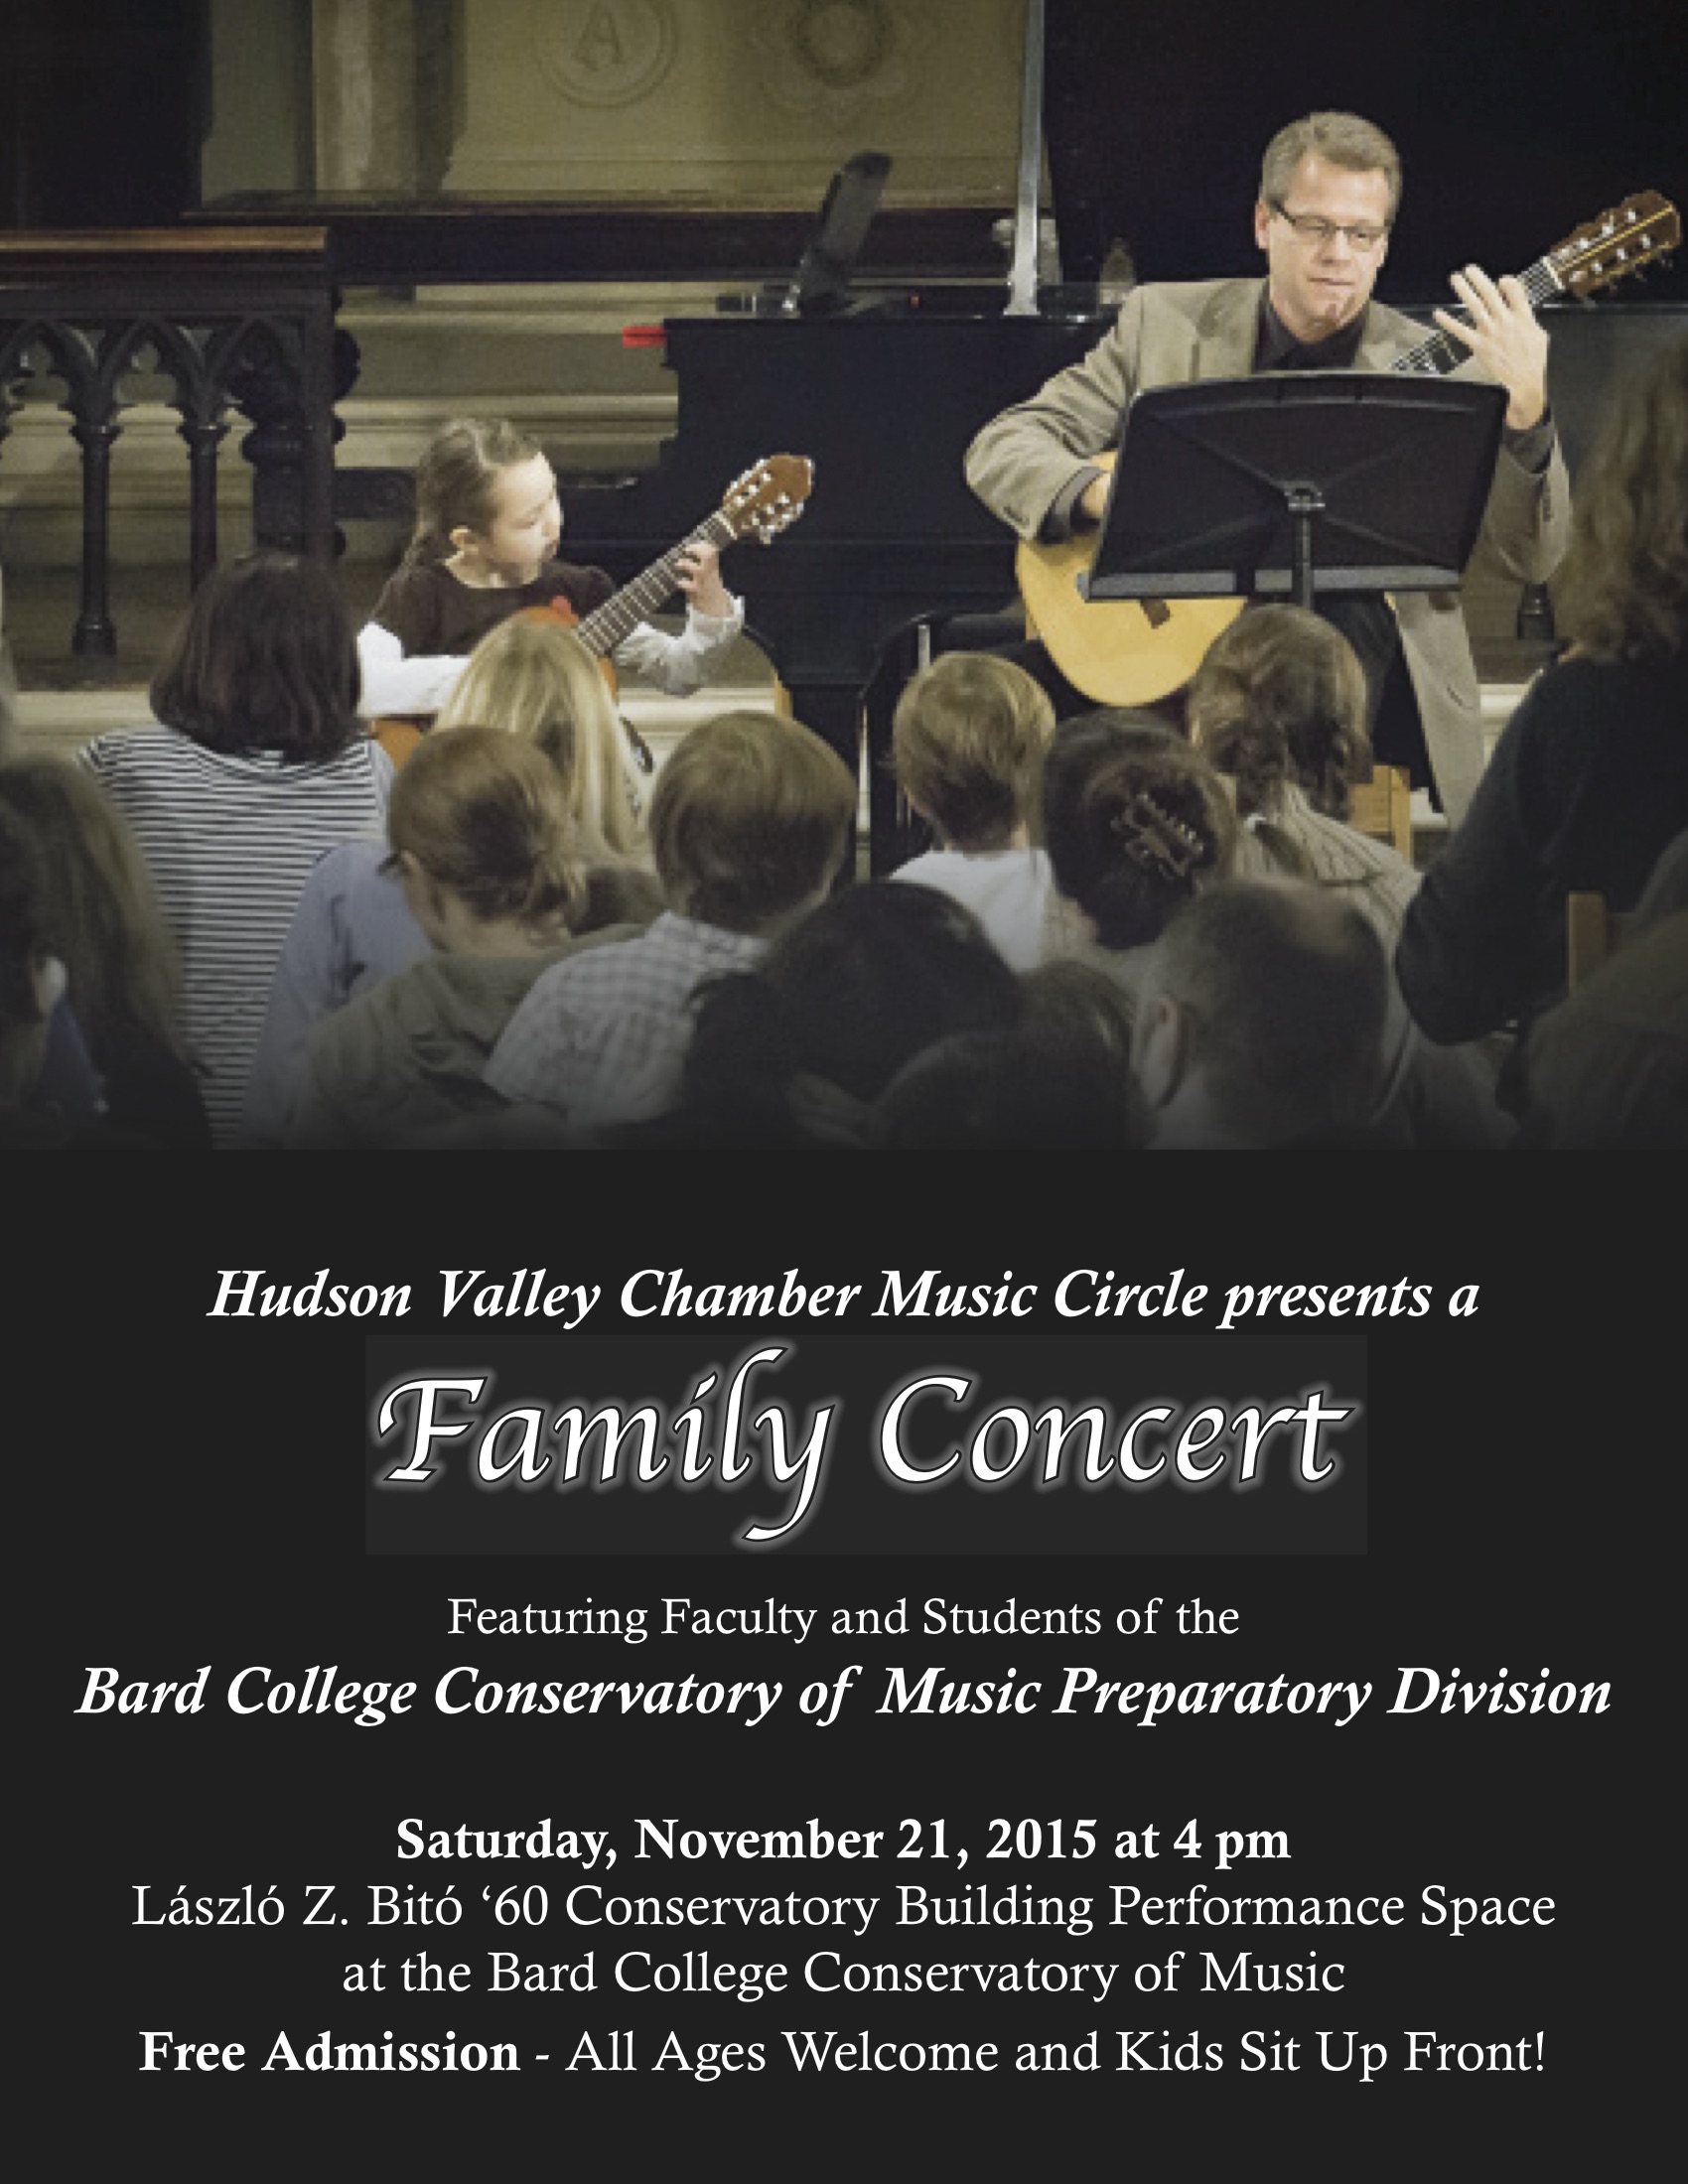 Bard Conservatory of Music Preparatory Division and Hudson Valley Chamber Music Circle FAMILY CONCERT